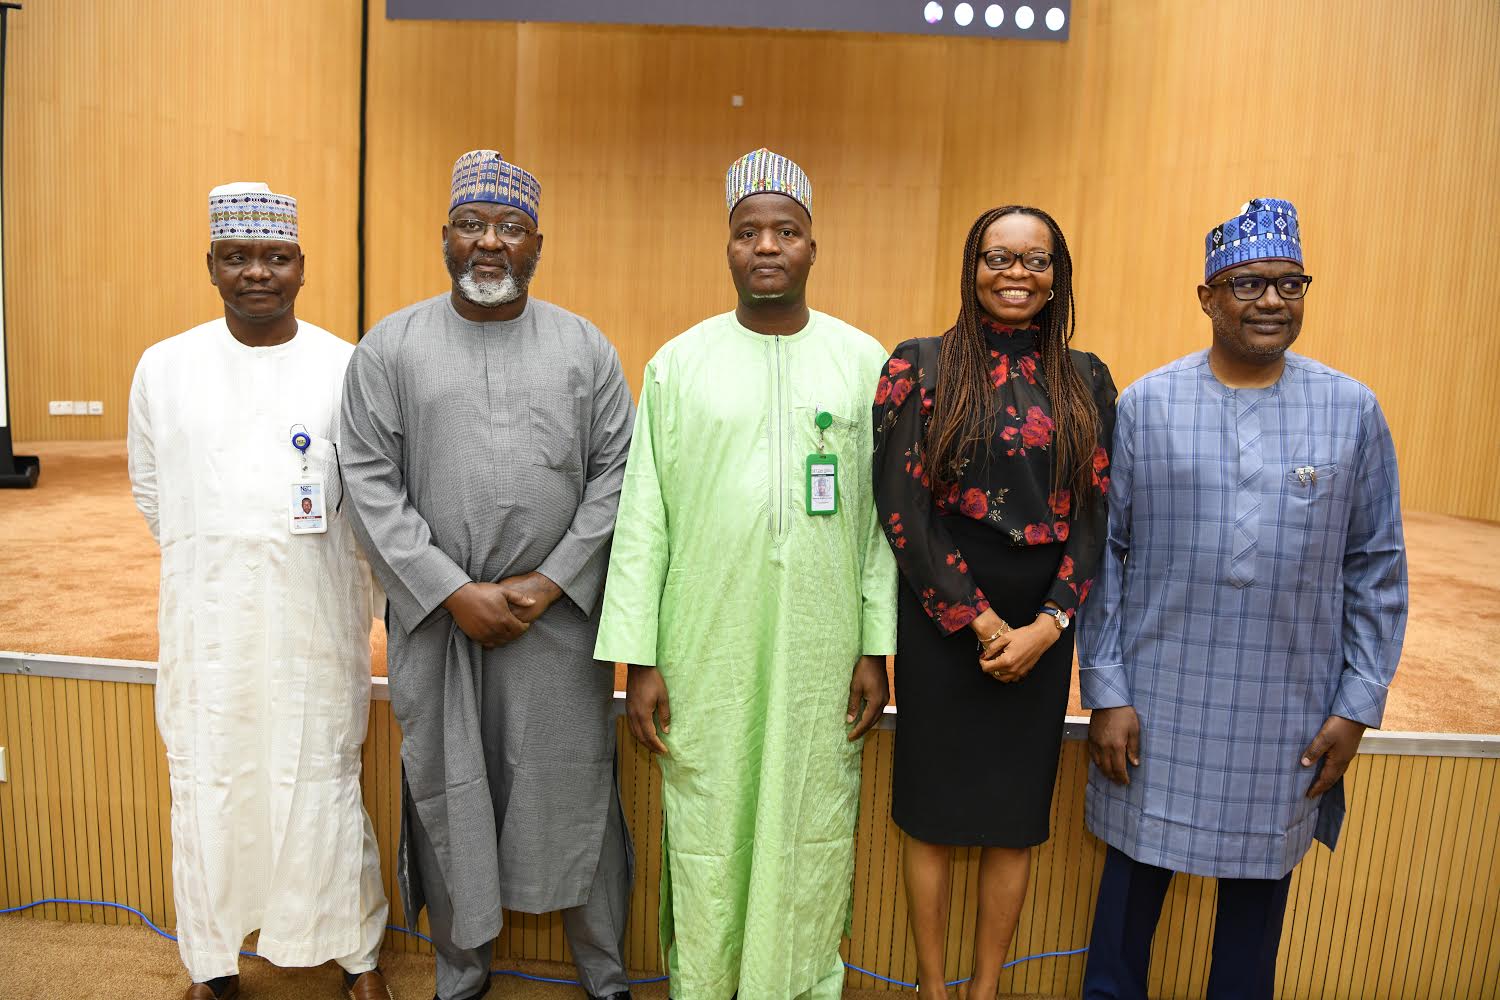 L-R: Abubakar Maina, Project Director, Broadband Implementation Steering Committee (BISC); Ubale Maska, Executive Commissioner, Technical Services, Nigerian Communications Commission (NCC) and Chairman, BISC; Dr. Usman Abdullahi, Director, Information Technology (IT) Infrastructure, National IT Development Agency (NITDA) and Vice-Chairman, BISC; Kelechi Okonta, Managing Director, Zinox Technologies Limited; Ibrahim Dikko, Managing Director, Backbone Connectivity Limited, during the first stakeholder consultation with telecommunication industry players on the implementation of the new national broadband plan held in Abuja on Tuesday (November 3, 2020)